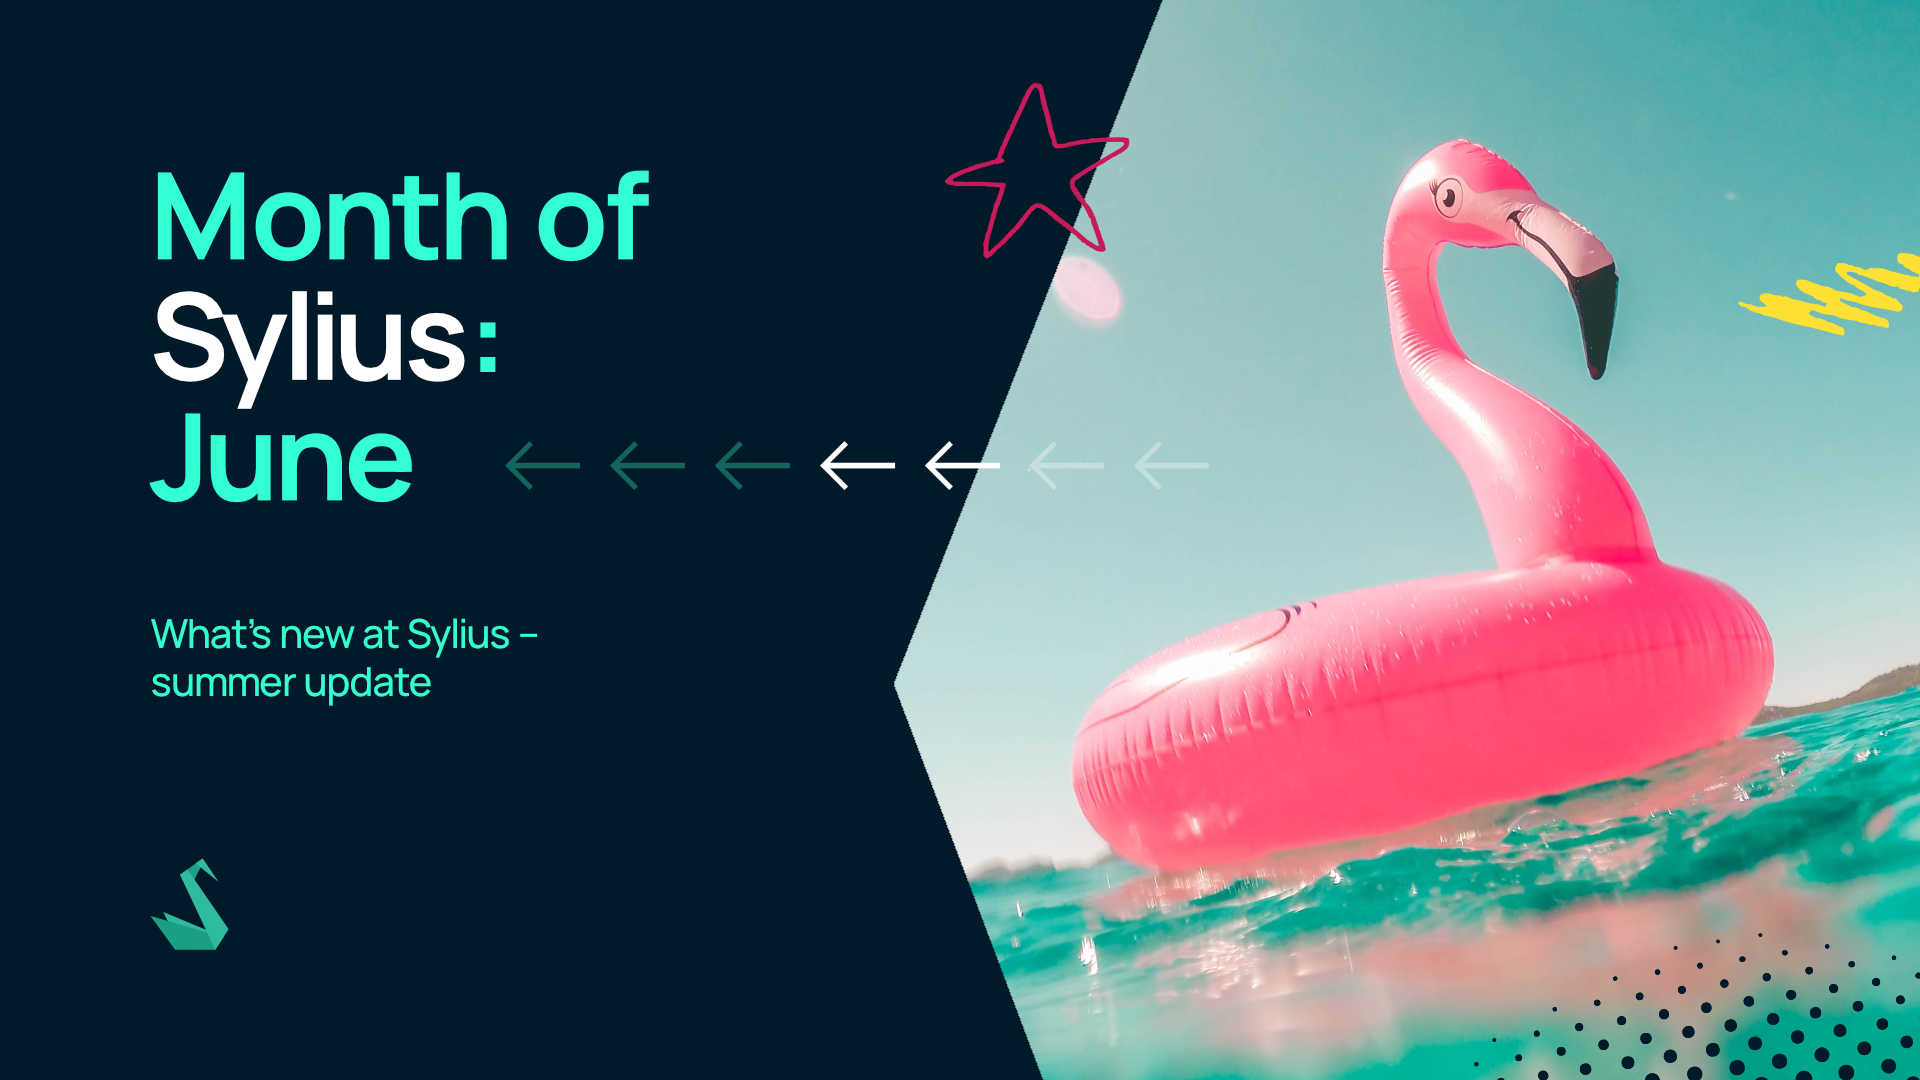 Month of Sylius series returns! What’s new at Sylius – summer update 🏖️